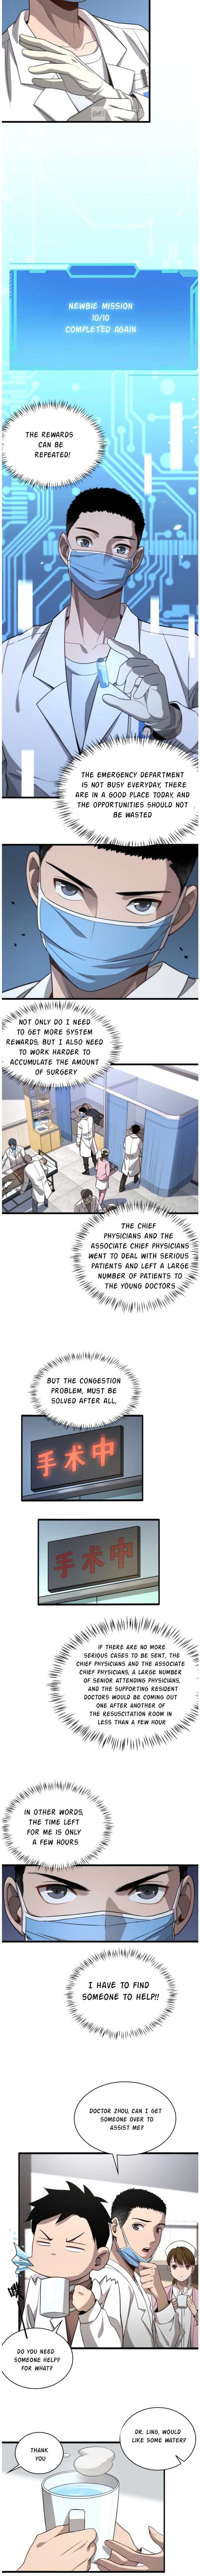 great_doctor_ling_ran_8_7